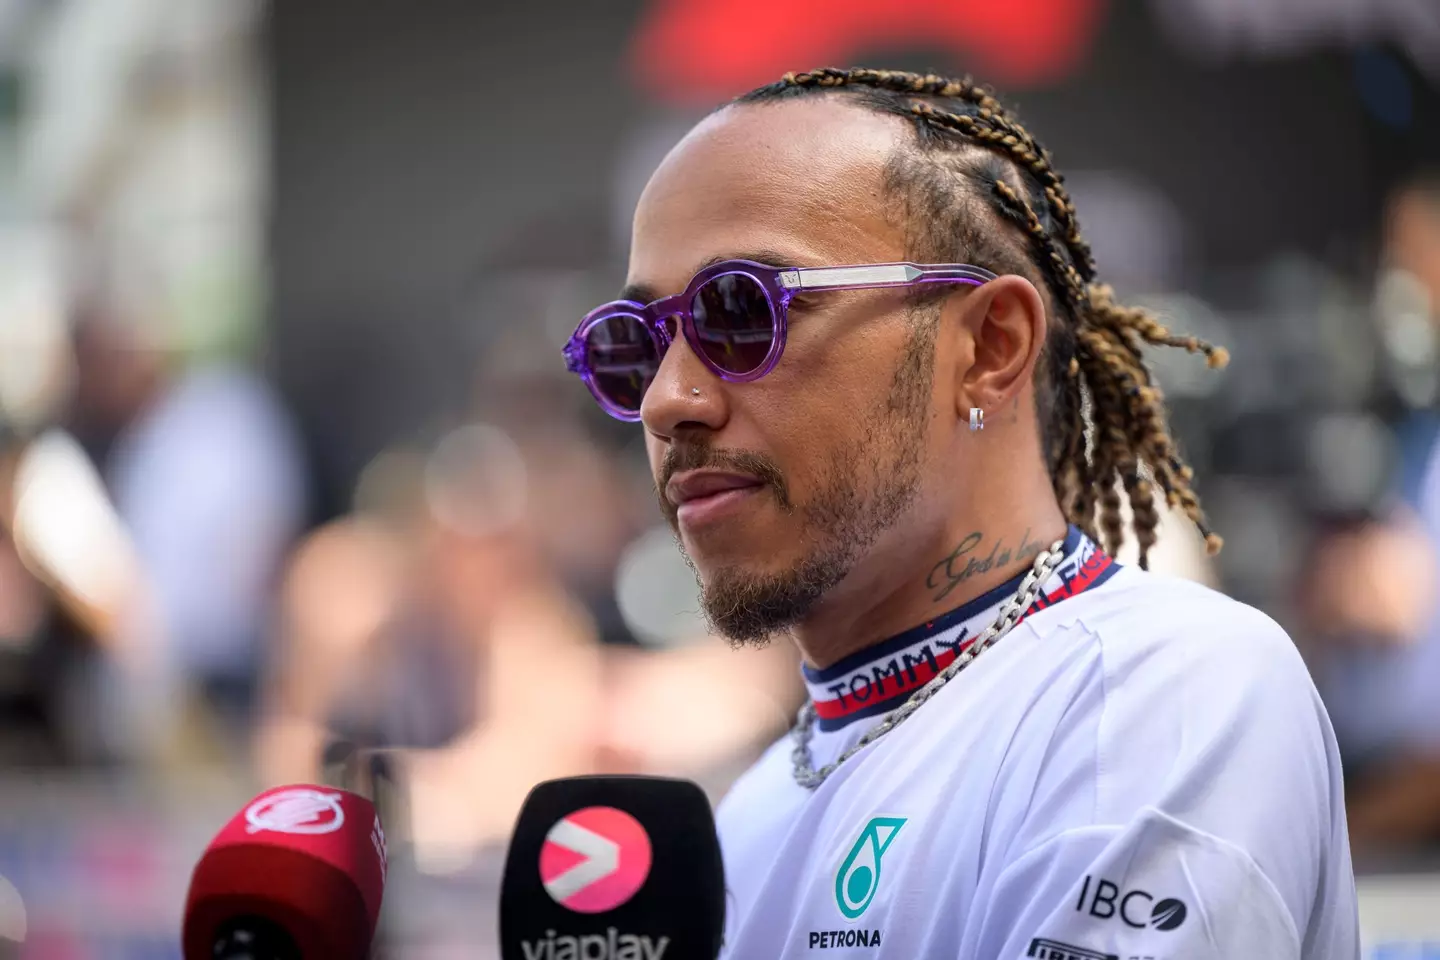 Hamilton lost out on the title in the final race of the 2021 season.